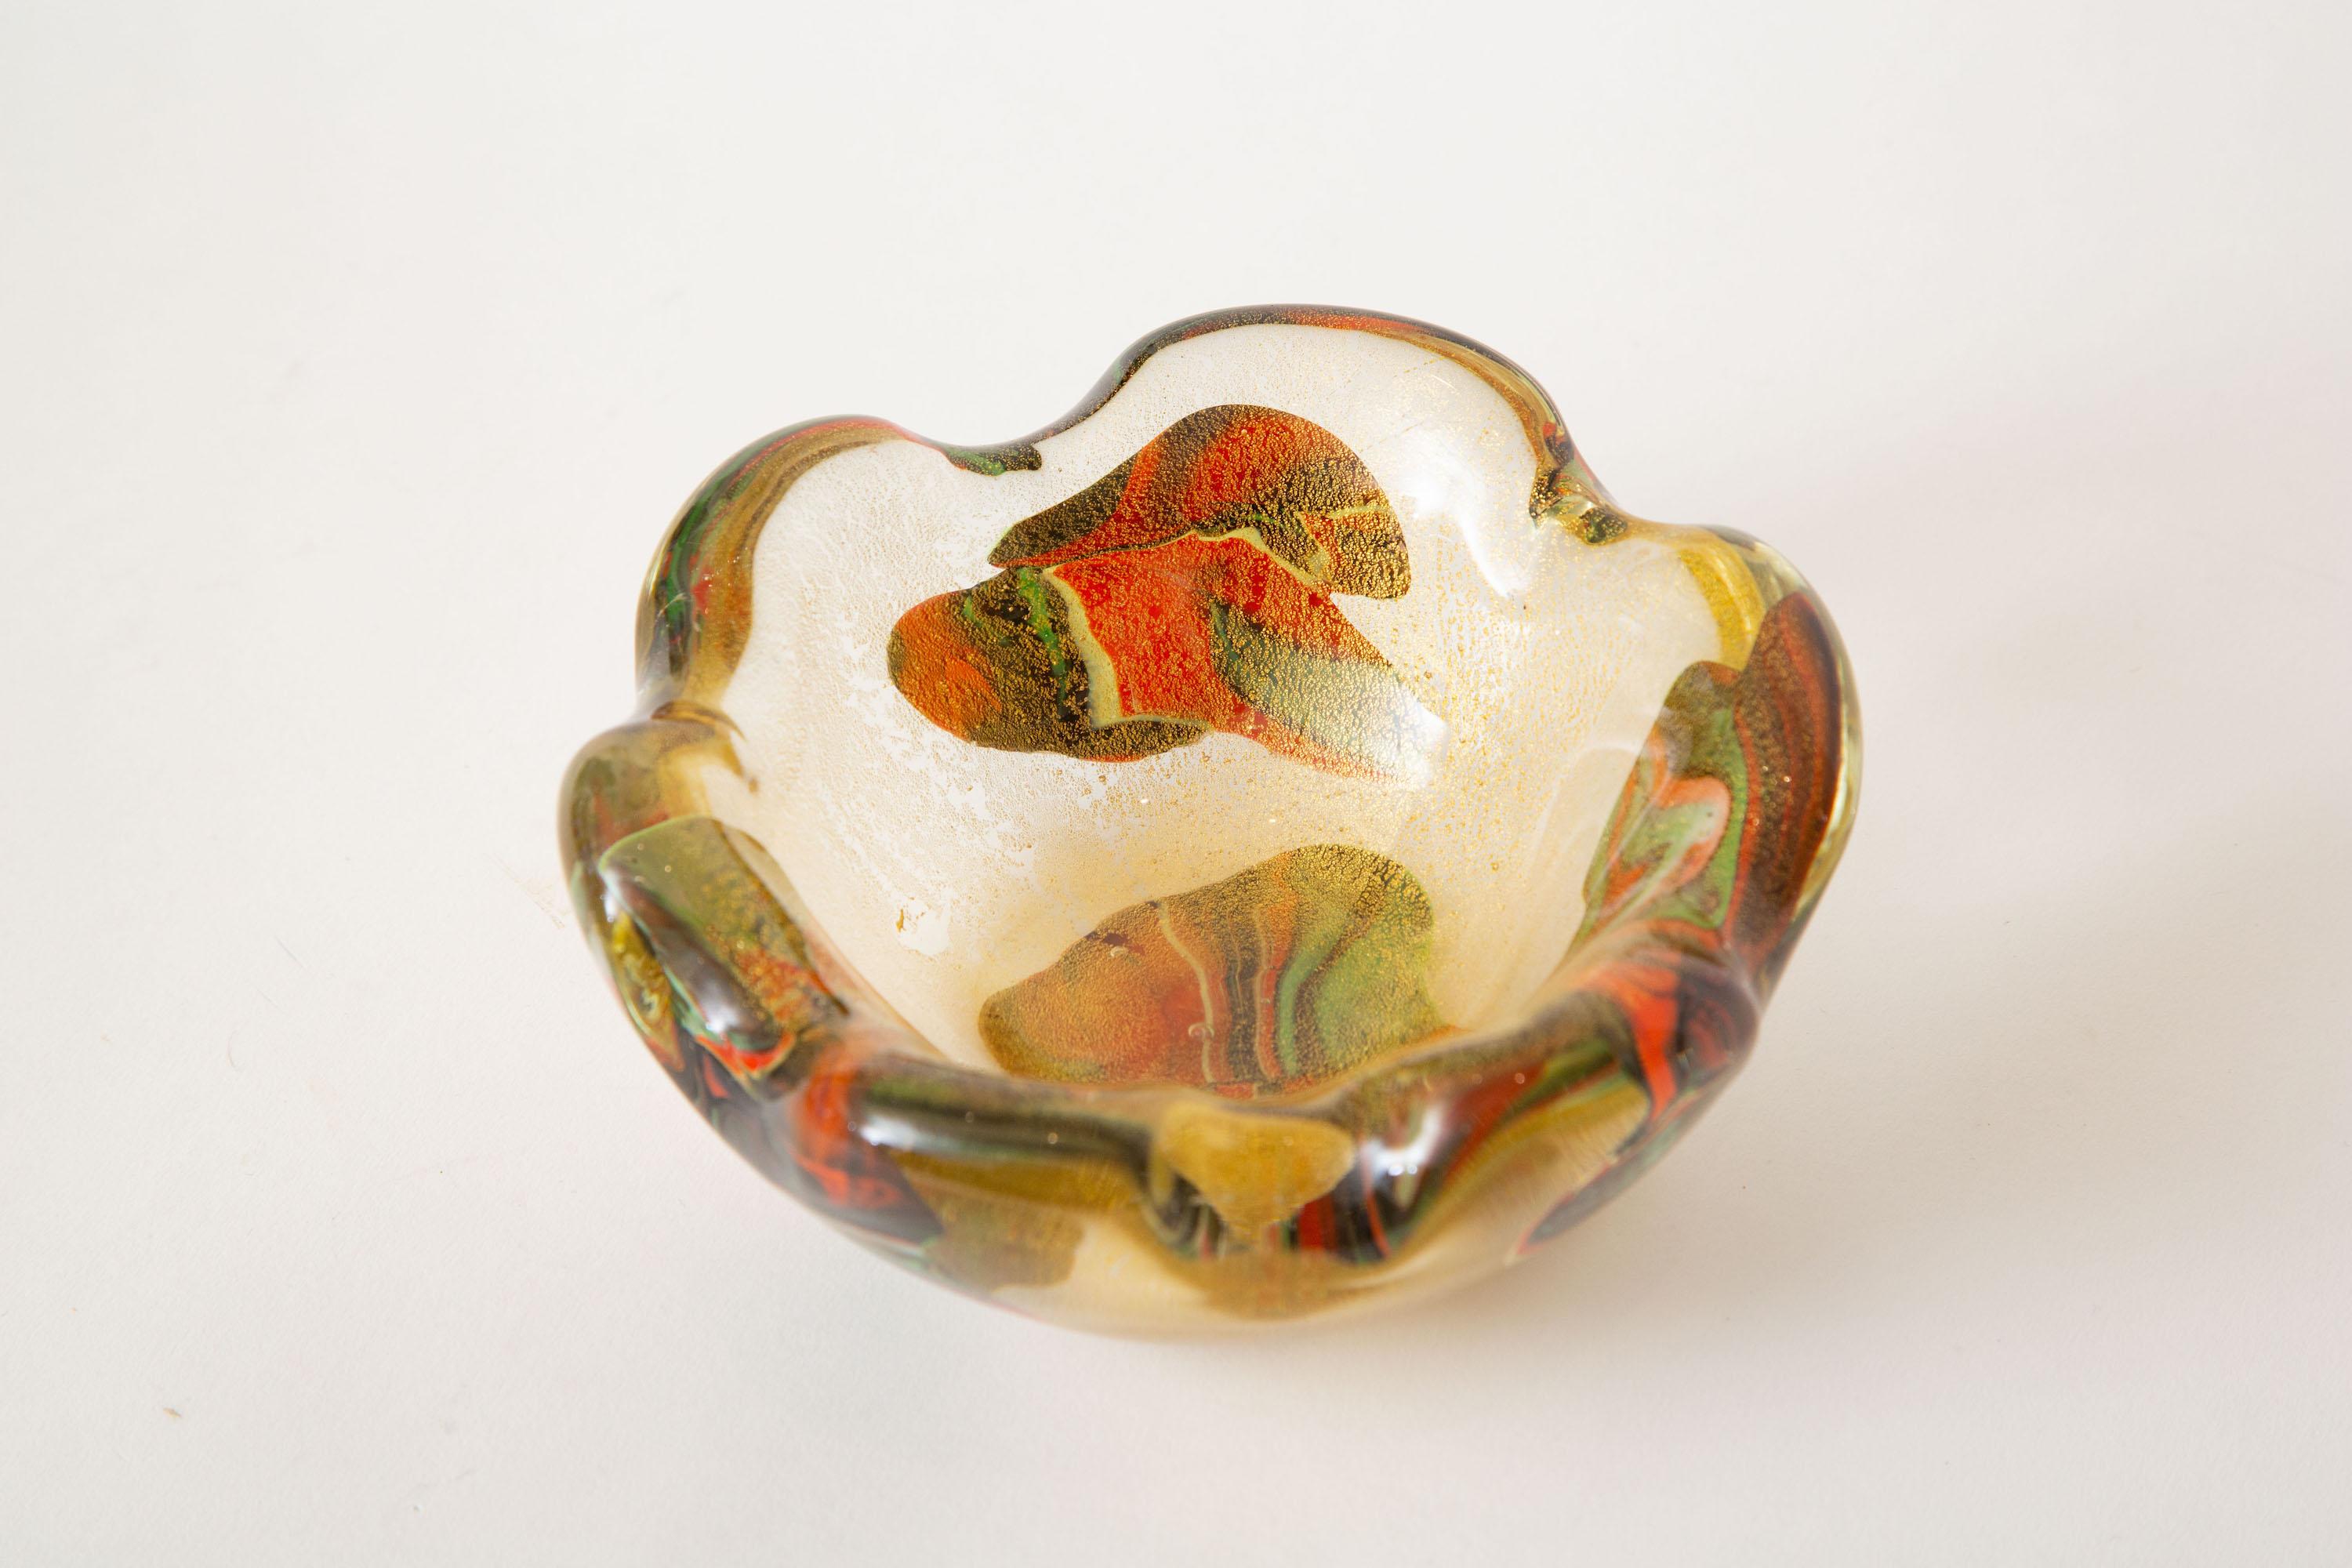 This stunning vintage Italian murano gold glass bowl is by Avem and has random sommerso patchwork blotches or blobs of forms that are in colors of red, orange, gold and green with abundant gold aventurine. It has scalloped edges. This is from the